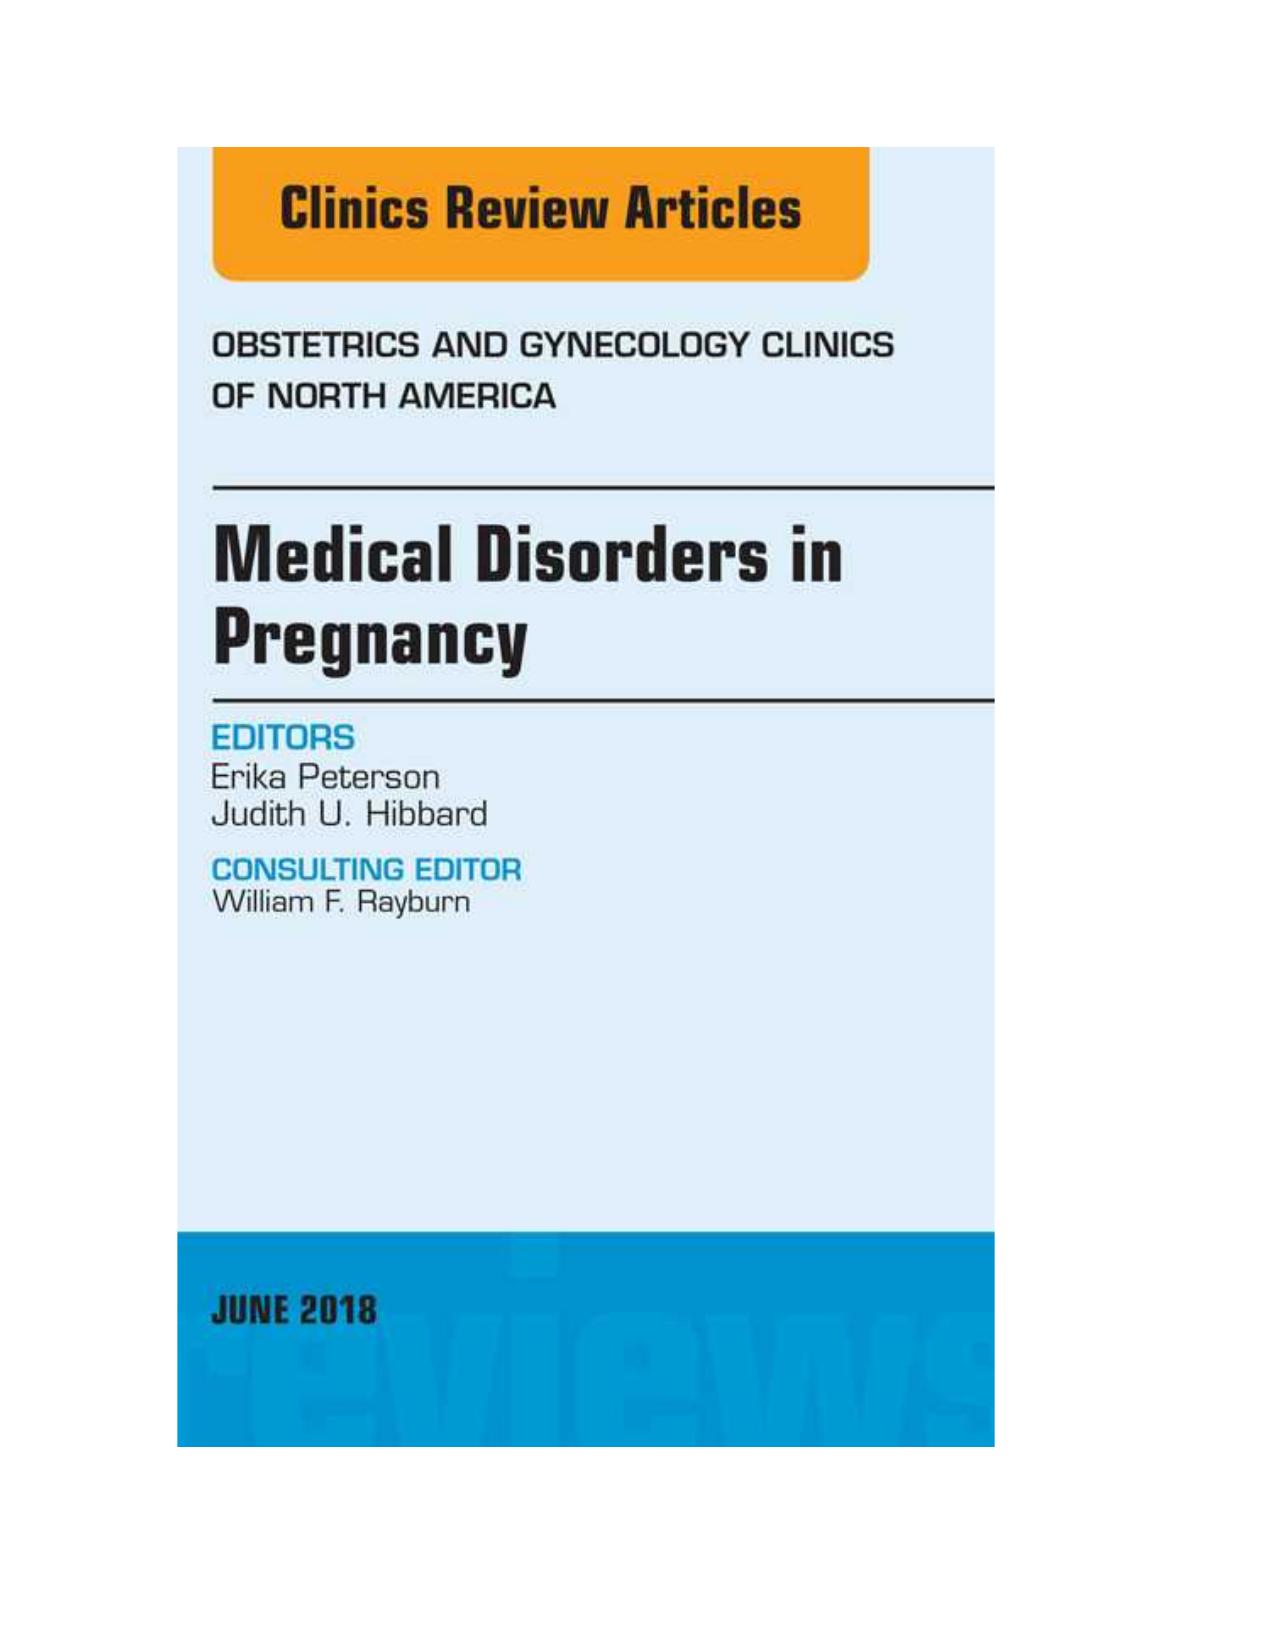 Medical Disorders in Pregnancy, An Issue of Obstetrics and Gynecology Clinics 2018